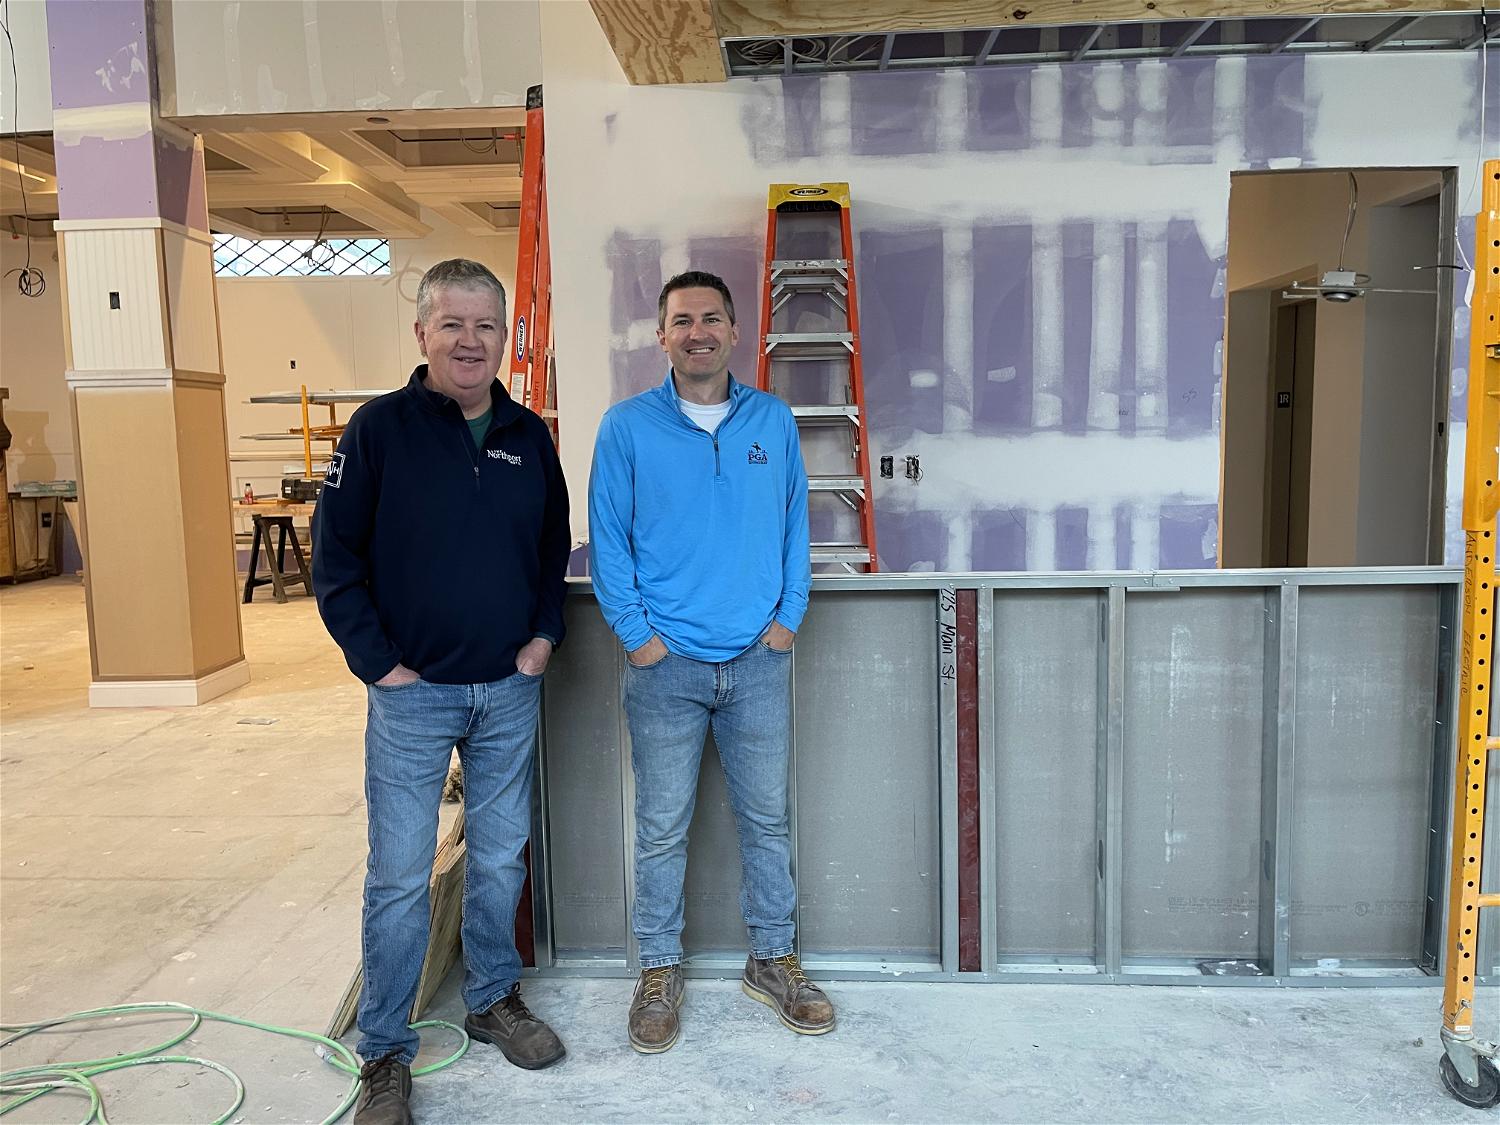 Kevin O’Neill, co-owner of the Northport Hotel, with lifelong Northporter Timothy Cocks of TC3 Construction and Consulting, at what will soon be the restaurant bar. Reservations for hotel stays beginning August 1 are now open.